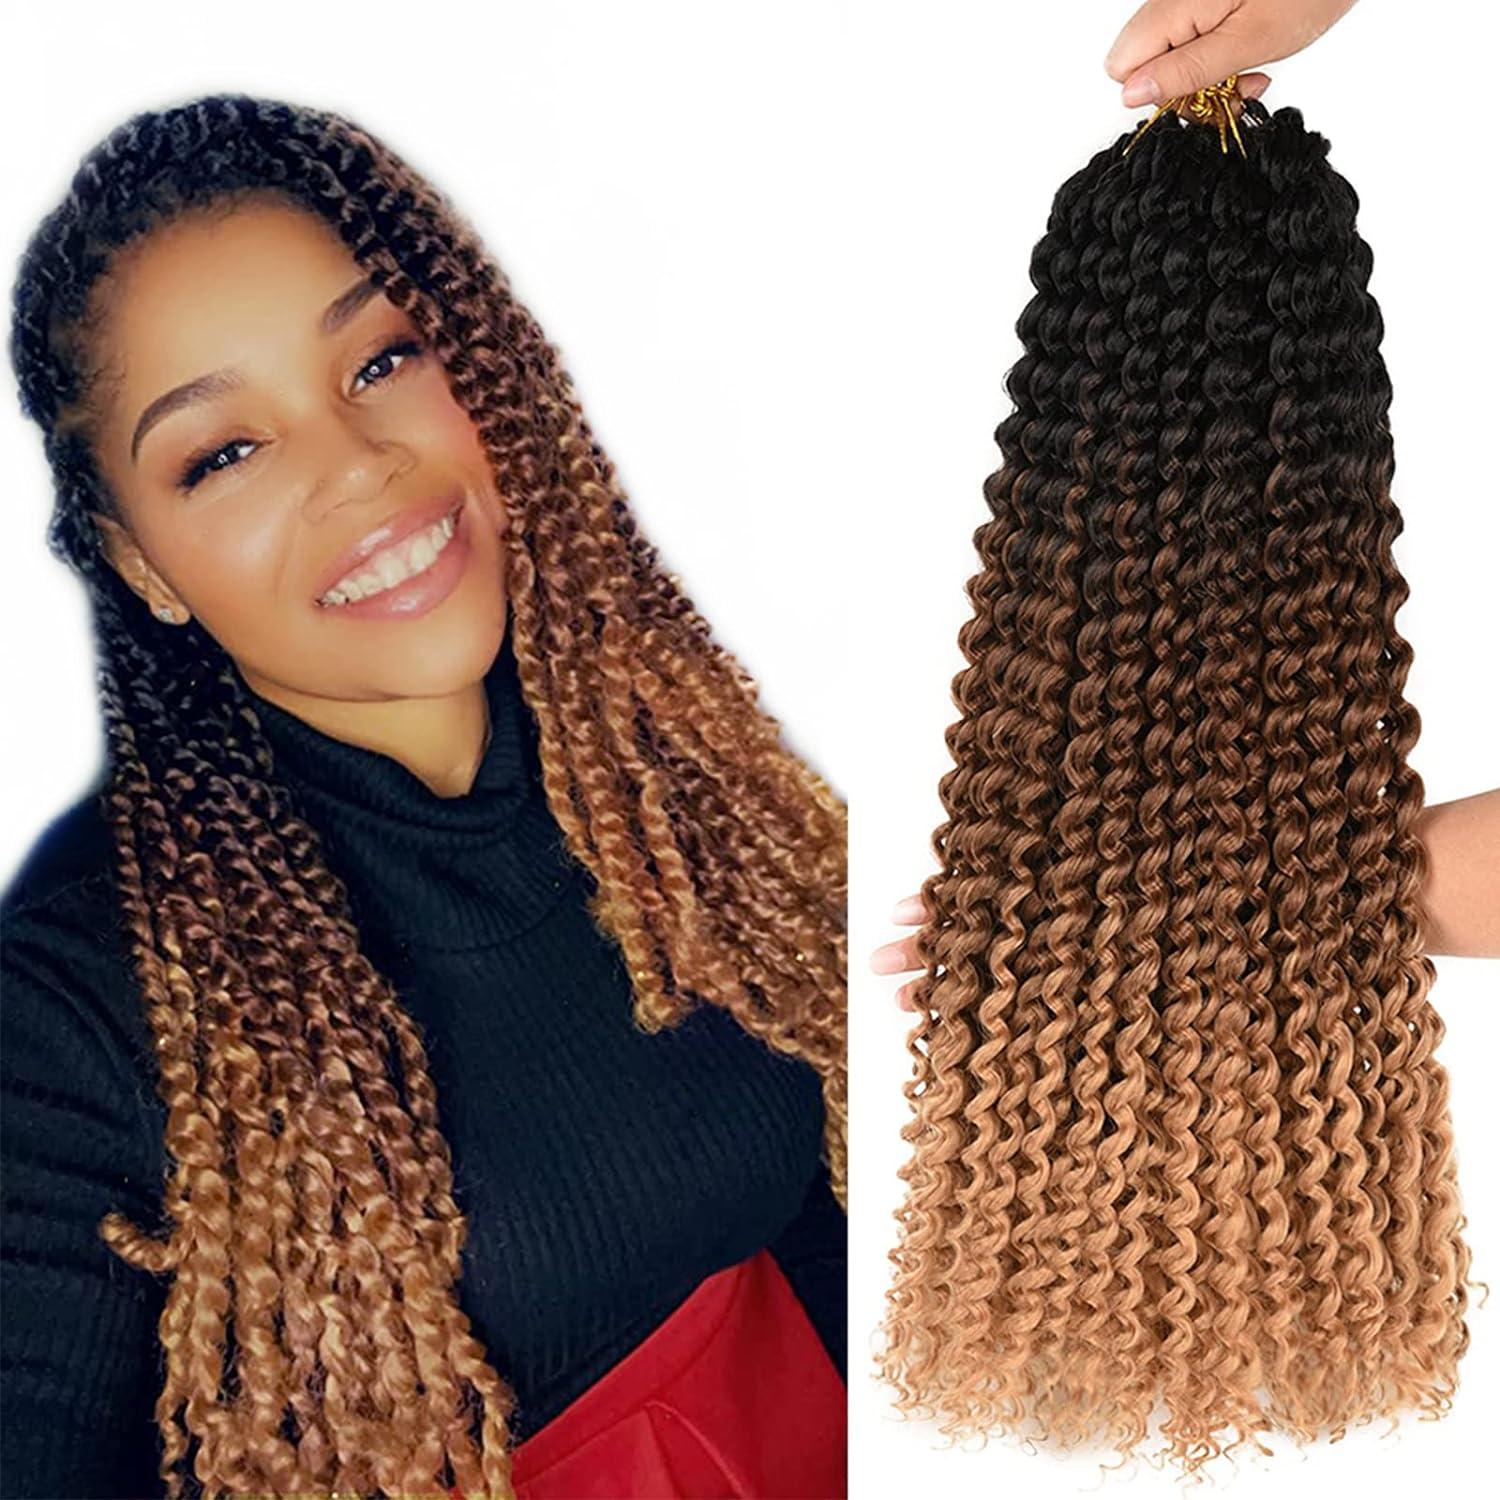 Benehair Passion Twist Hair Extensions Water Wave Pre Looped Black  Pre-twisted Passion Twist Bohomian Braids Crochet Braided hair for Women 